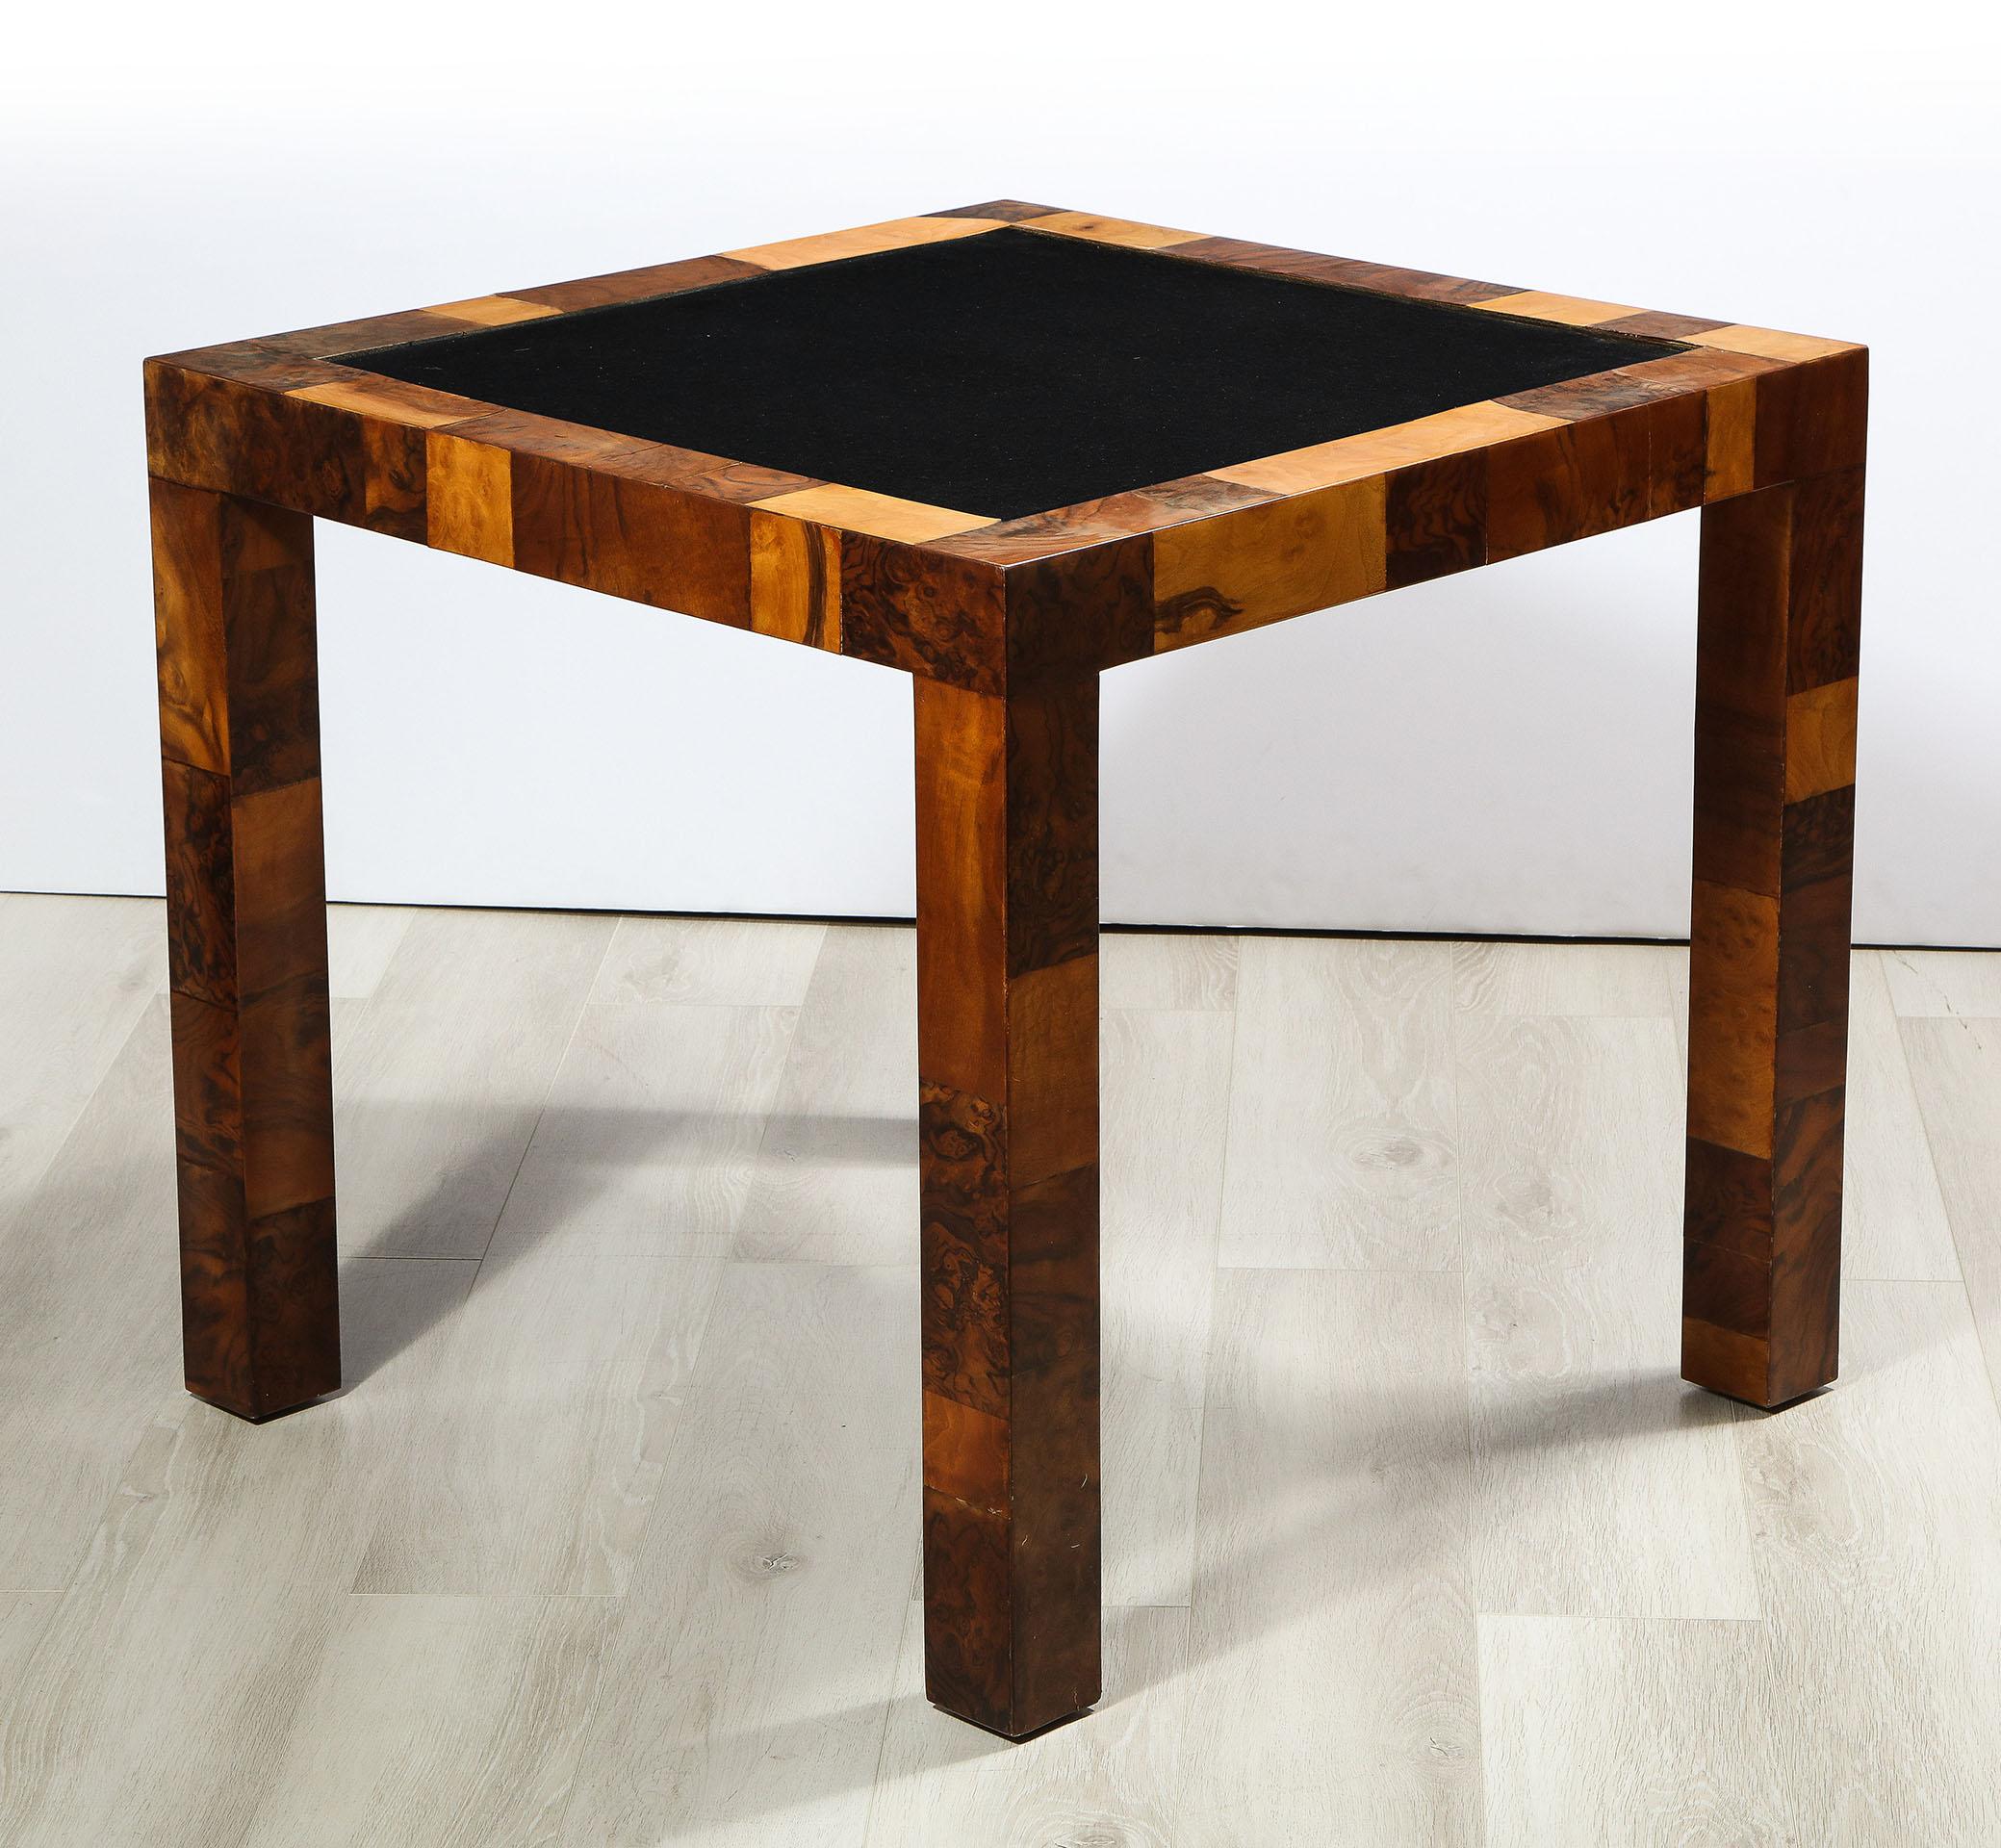 20th Century Patchwork Burl and Polished Brass Game Table by Paul Evans